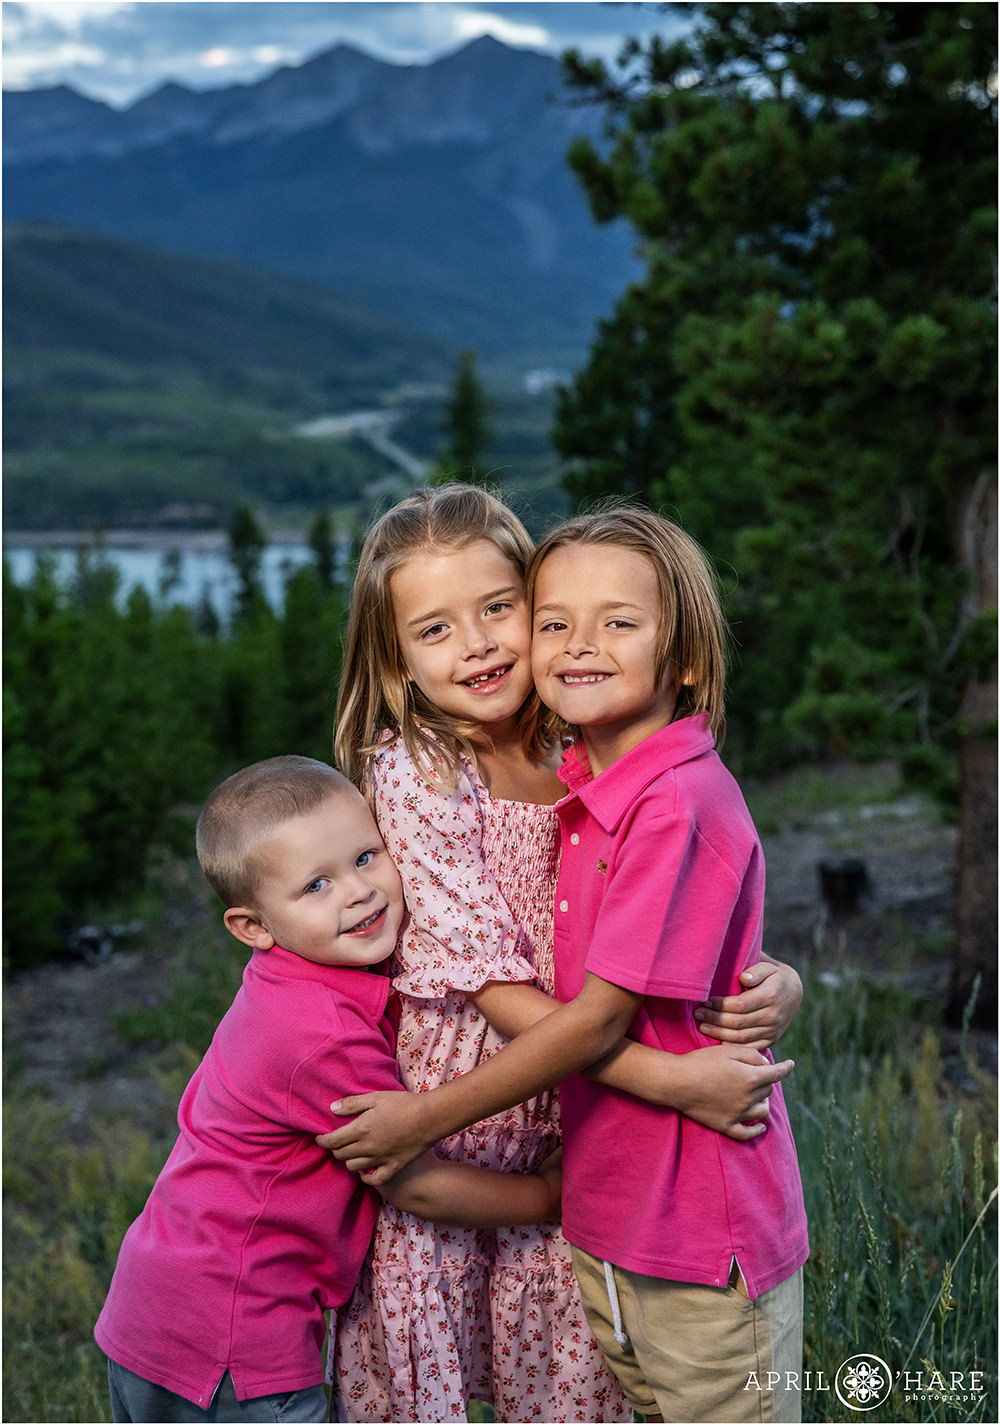 Cute young cousins hug each other at their family photos in Colorado